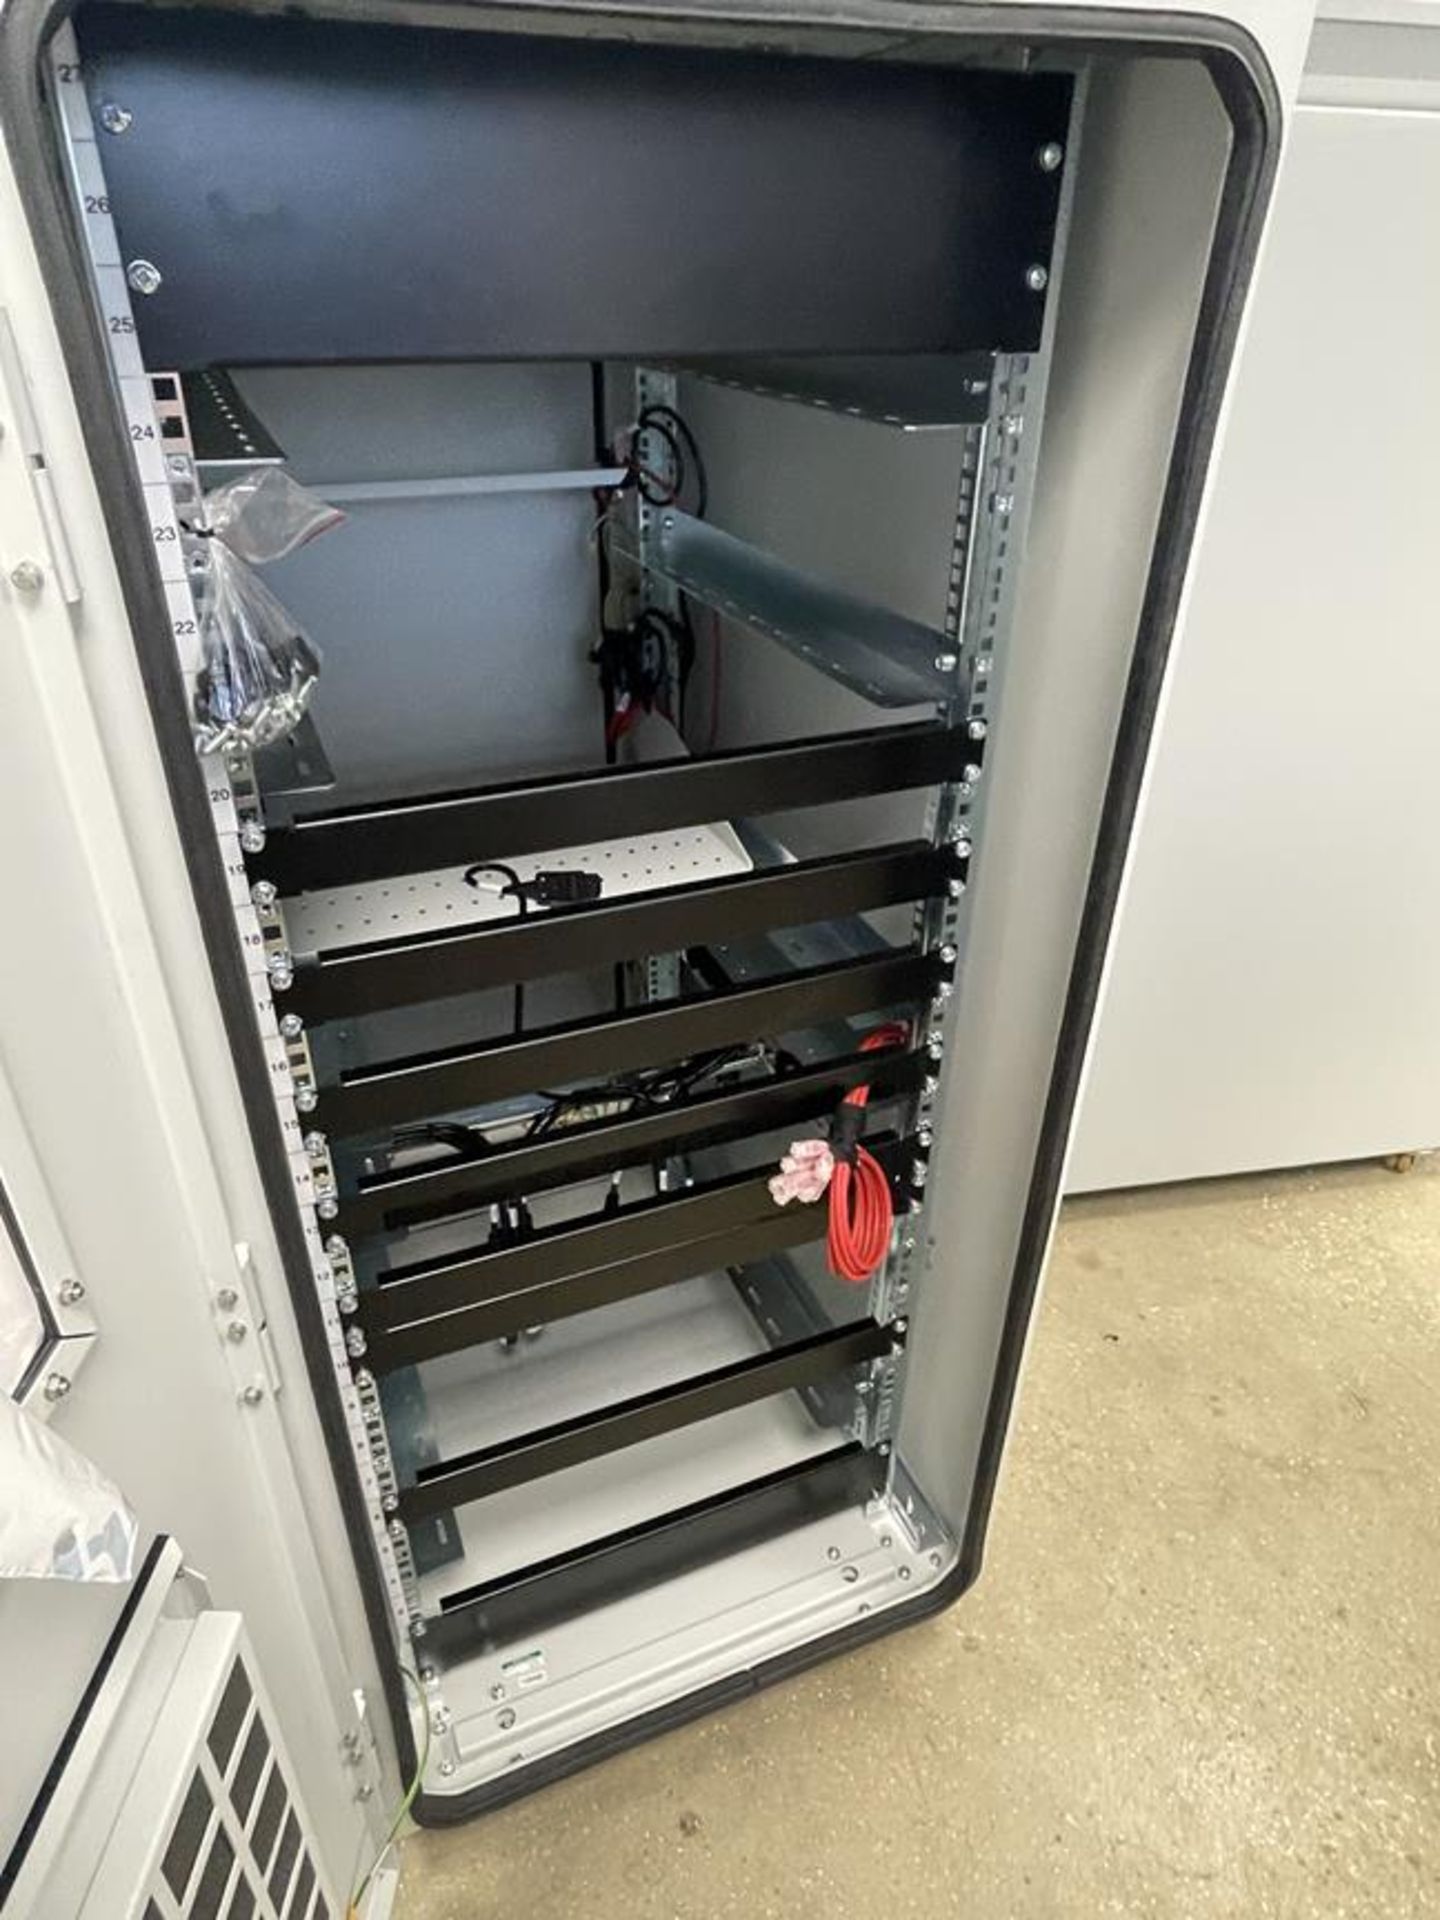 7x 27U 19" Server Racks with Integrated Rainford Fans (GB REF#207) - Image 3 of 6